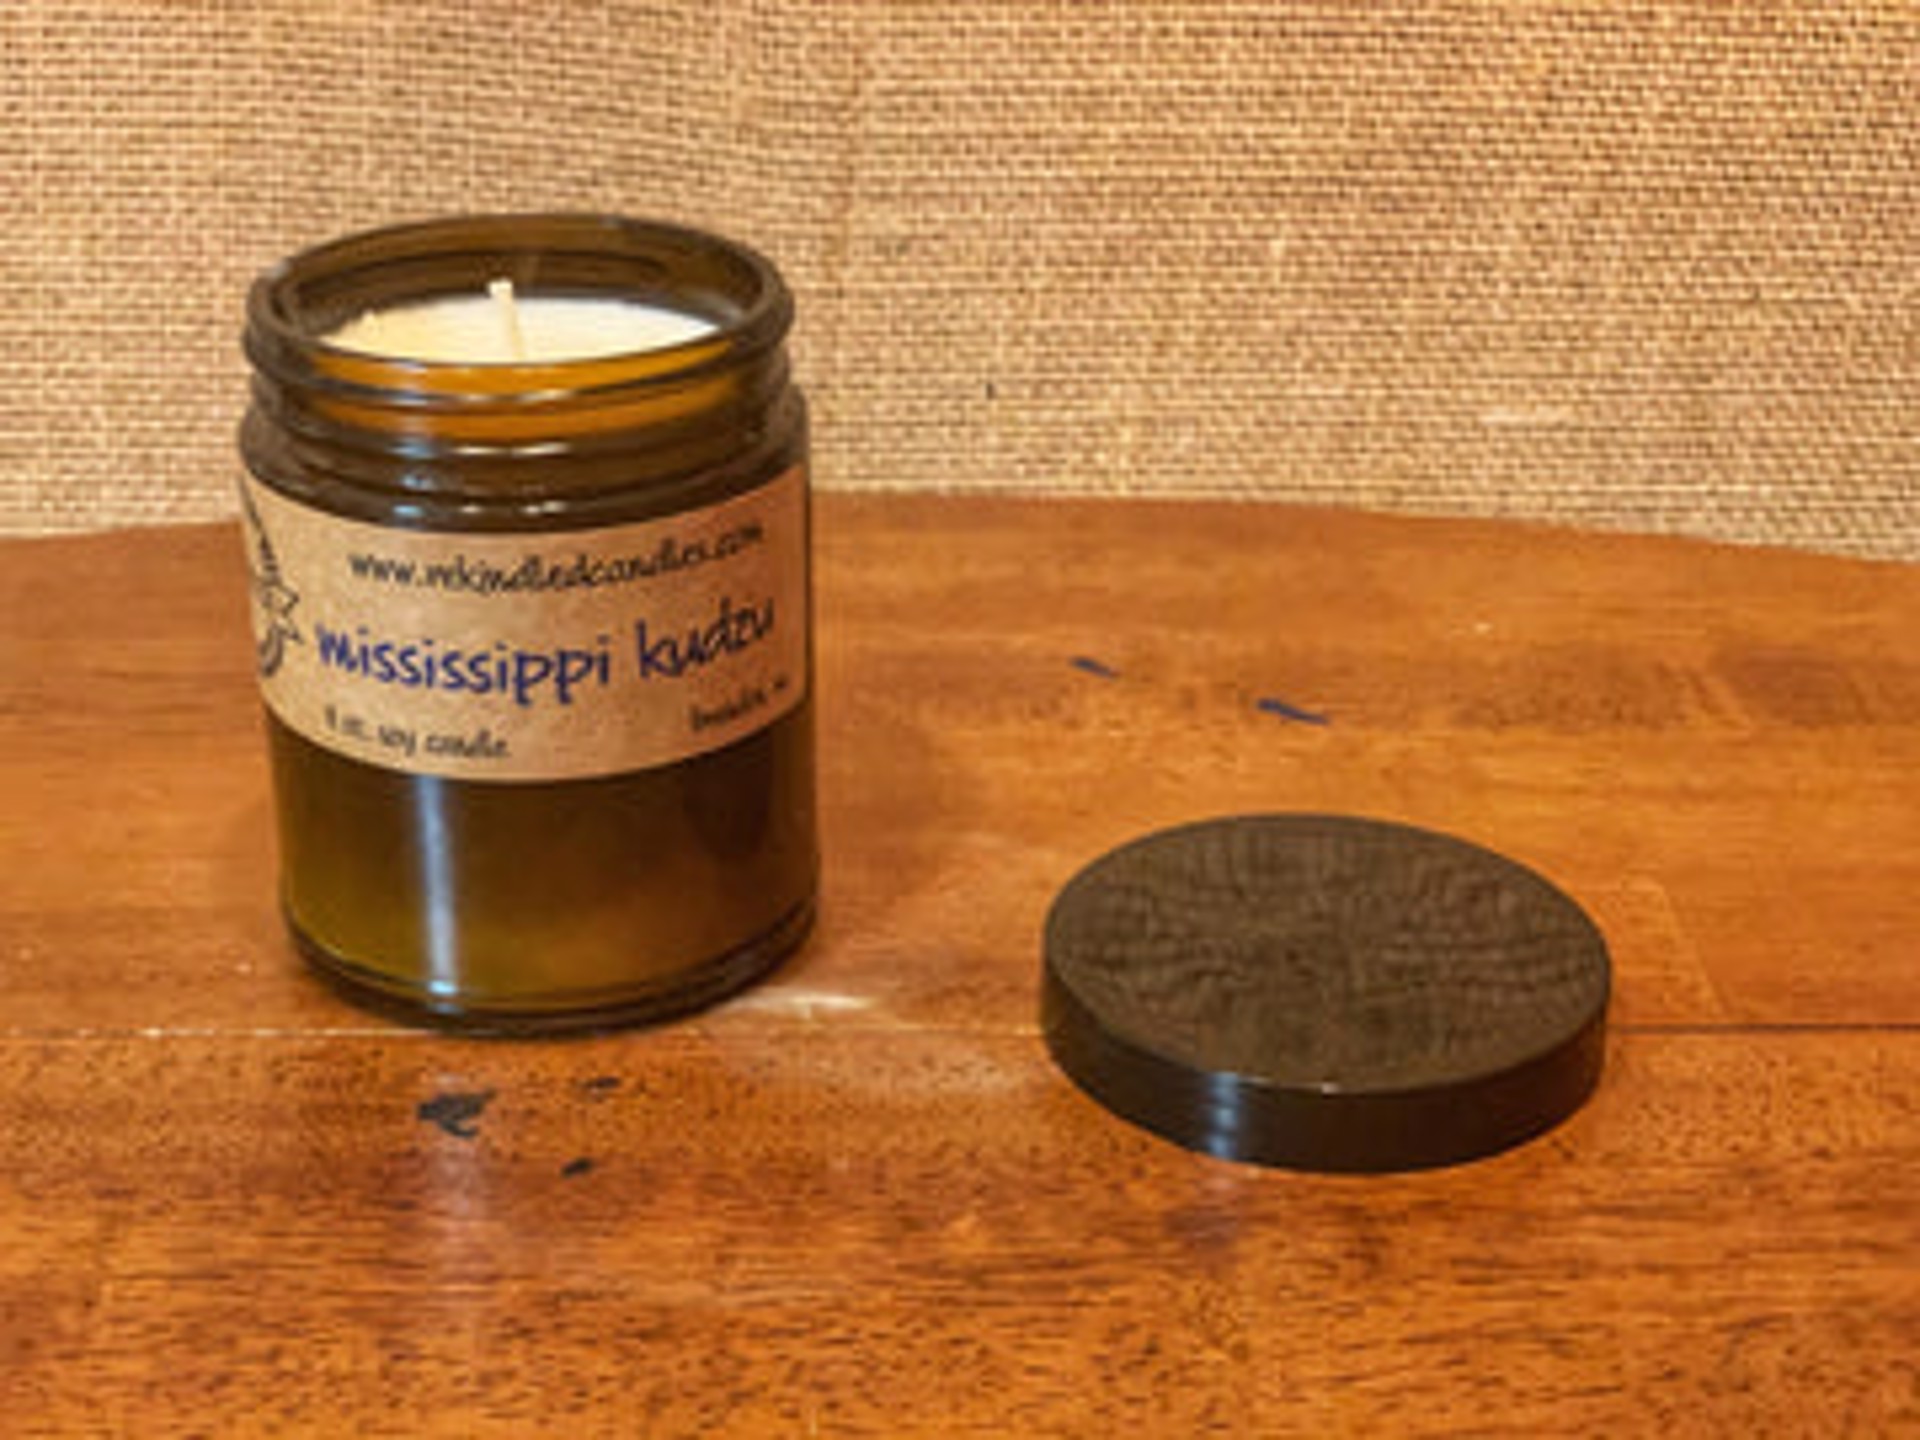 Mississippi Kudzu Amber Jar Candle by re-kindled candle company